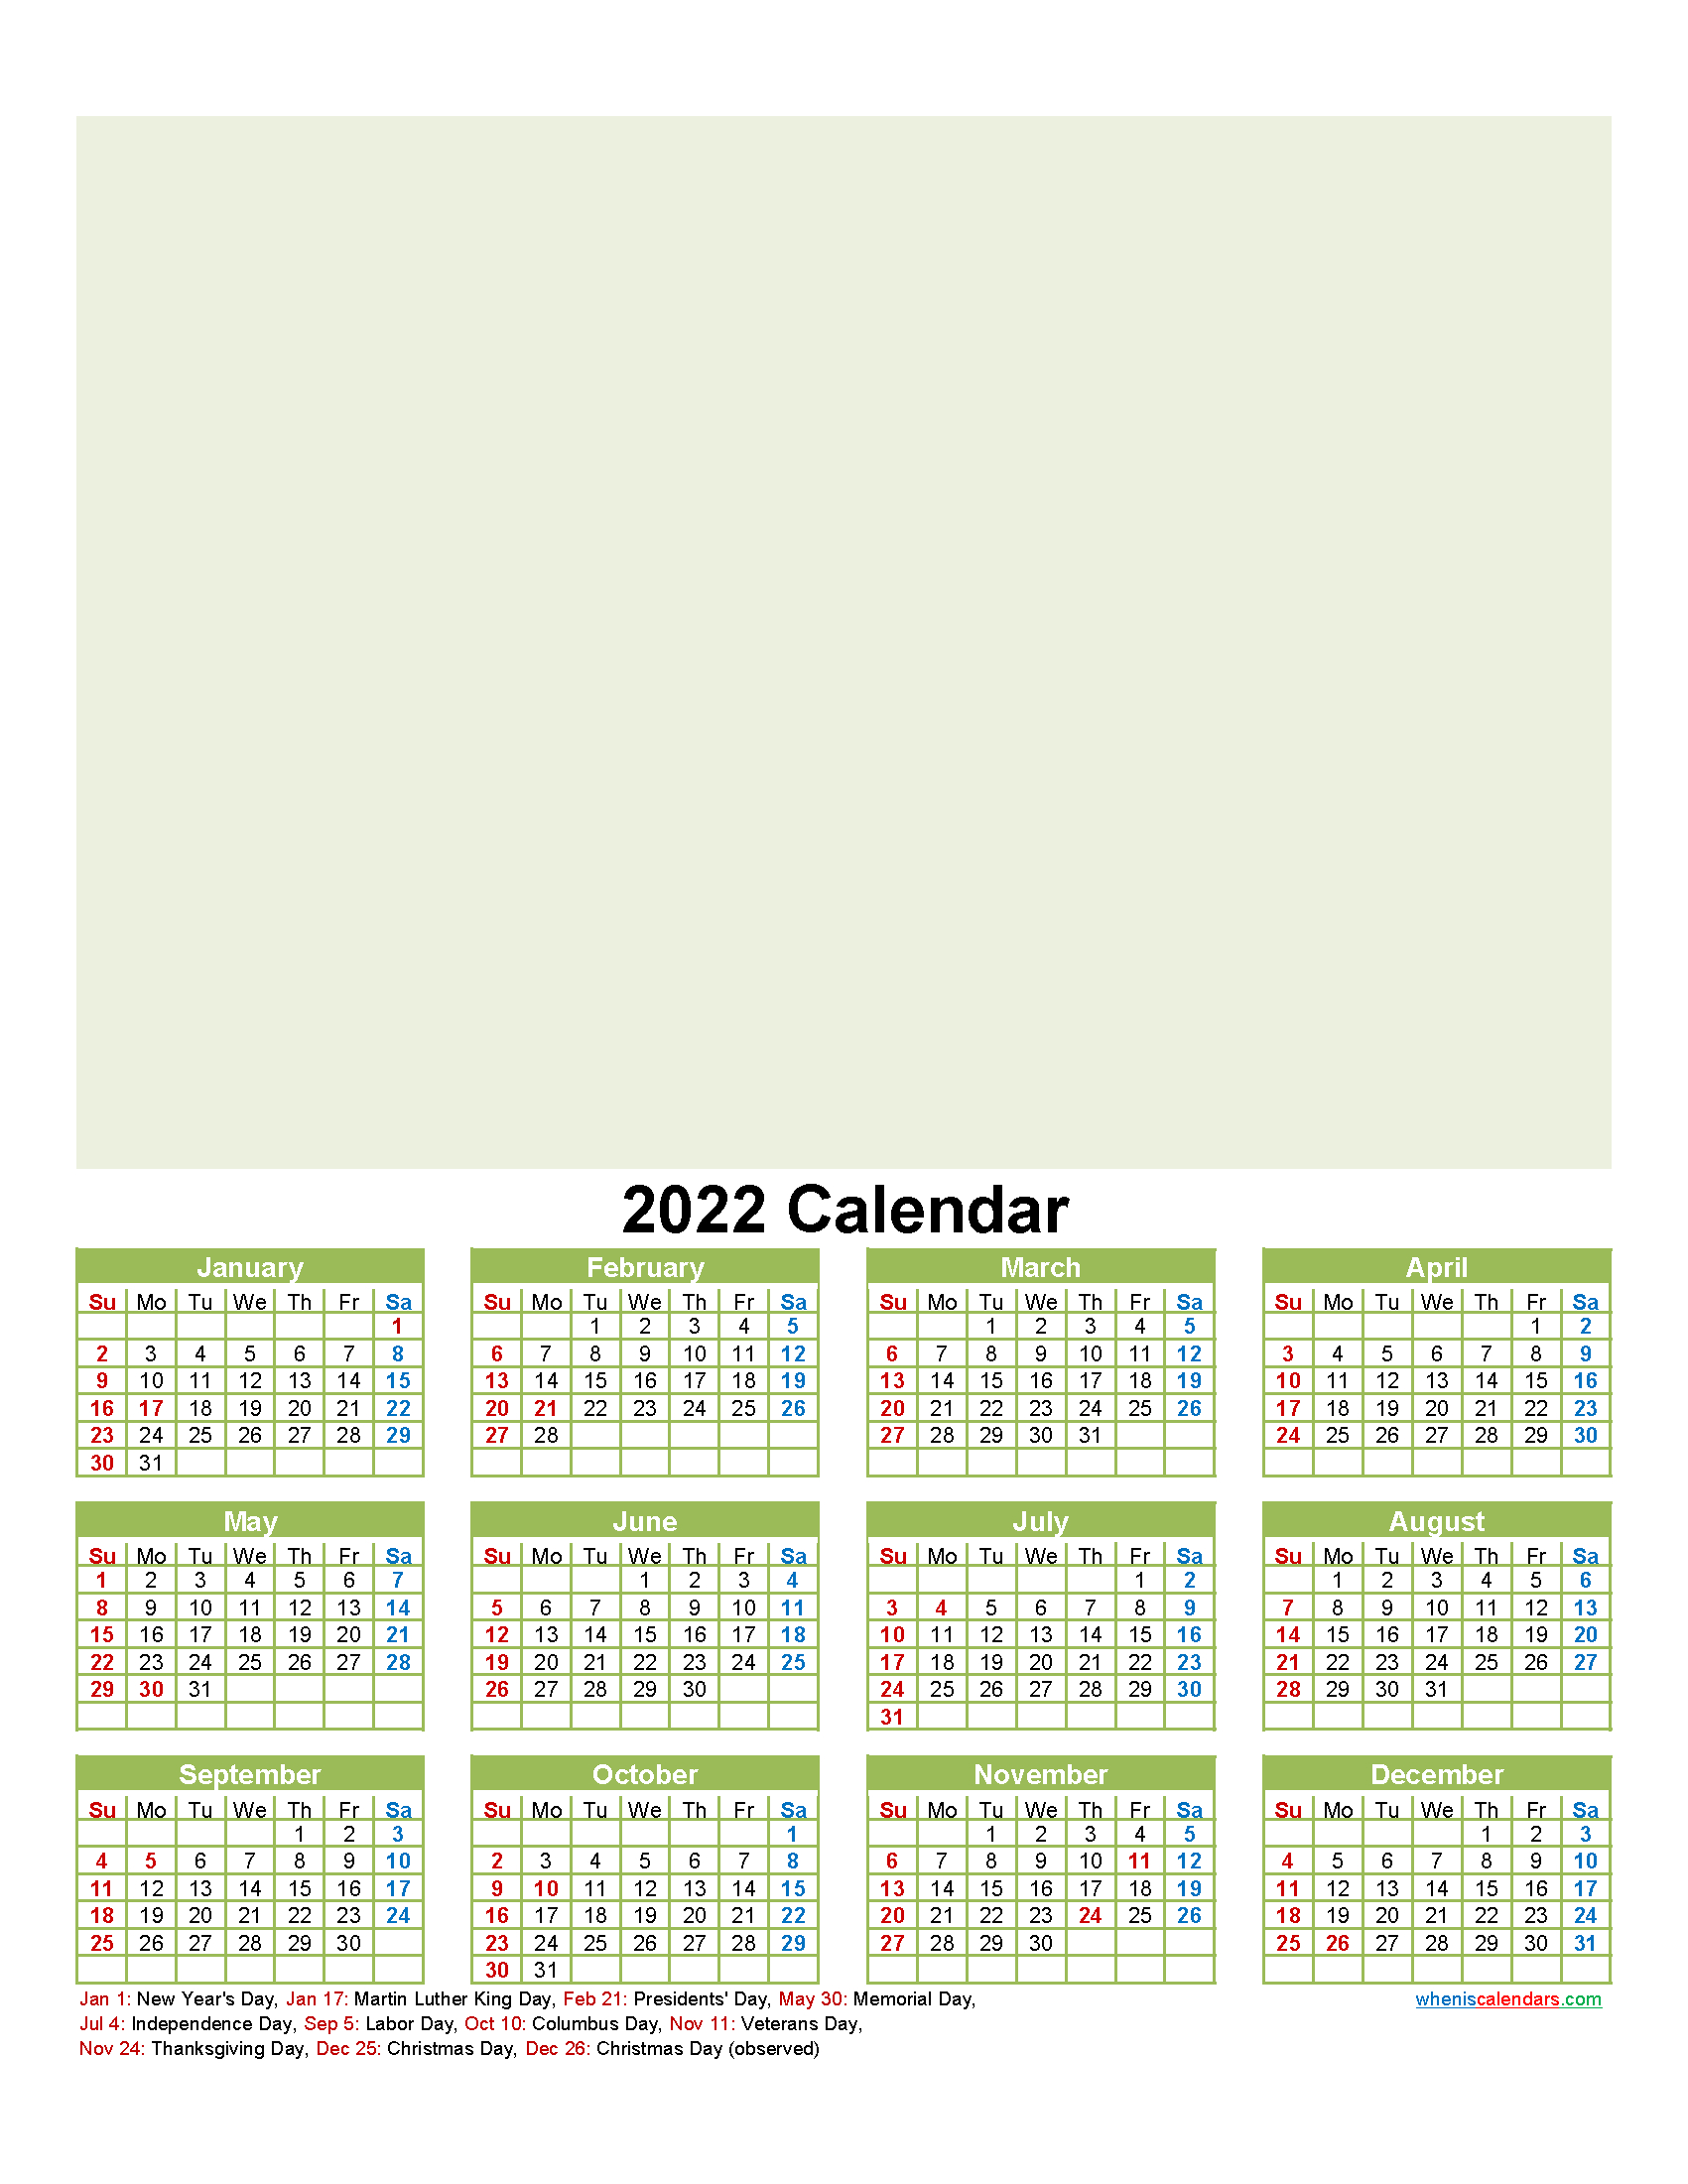 Personalised Photo Calendar 2022 - Template No.f22Y18  How To Make A 2022 Calendar